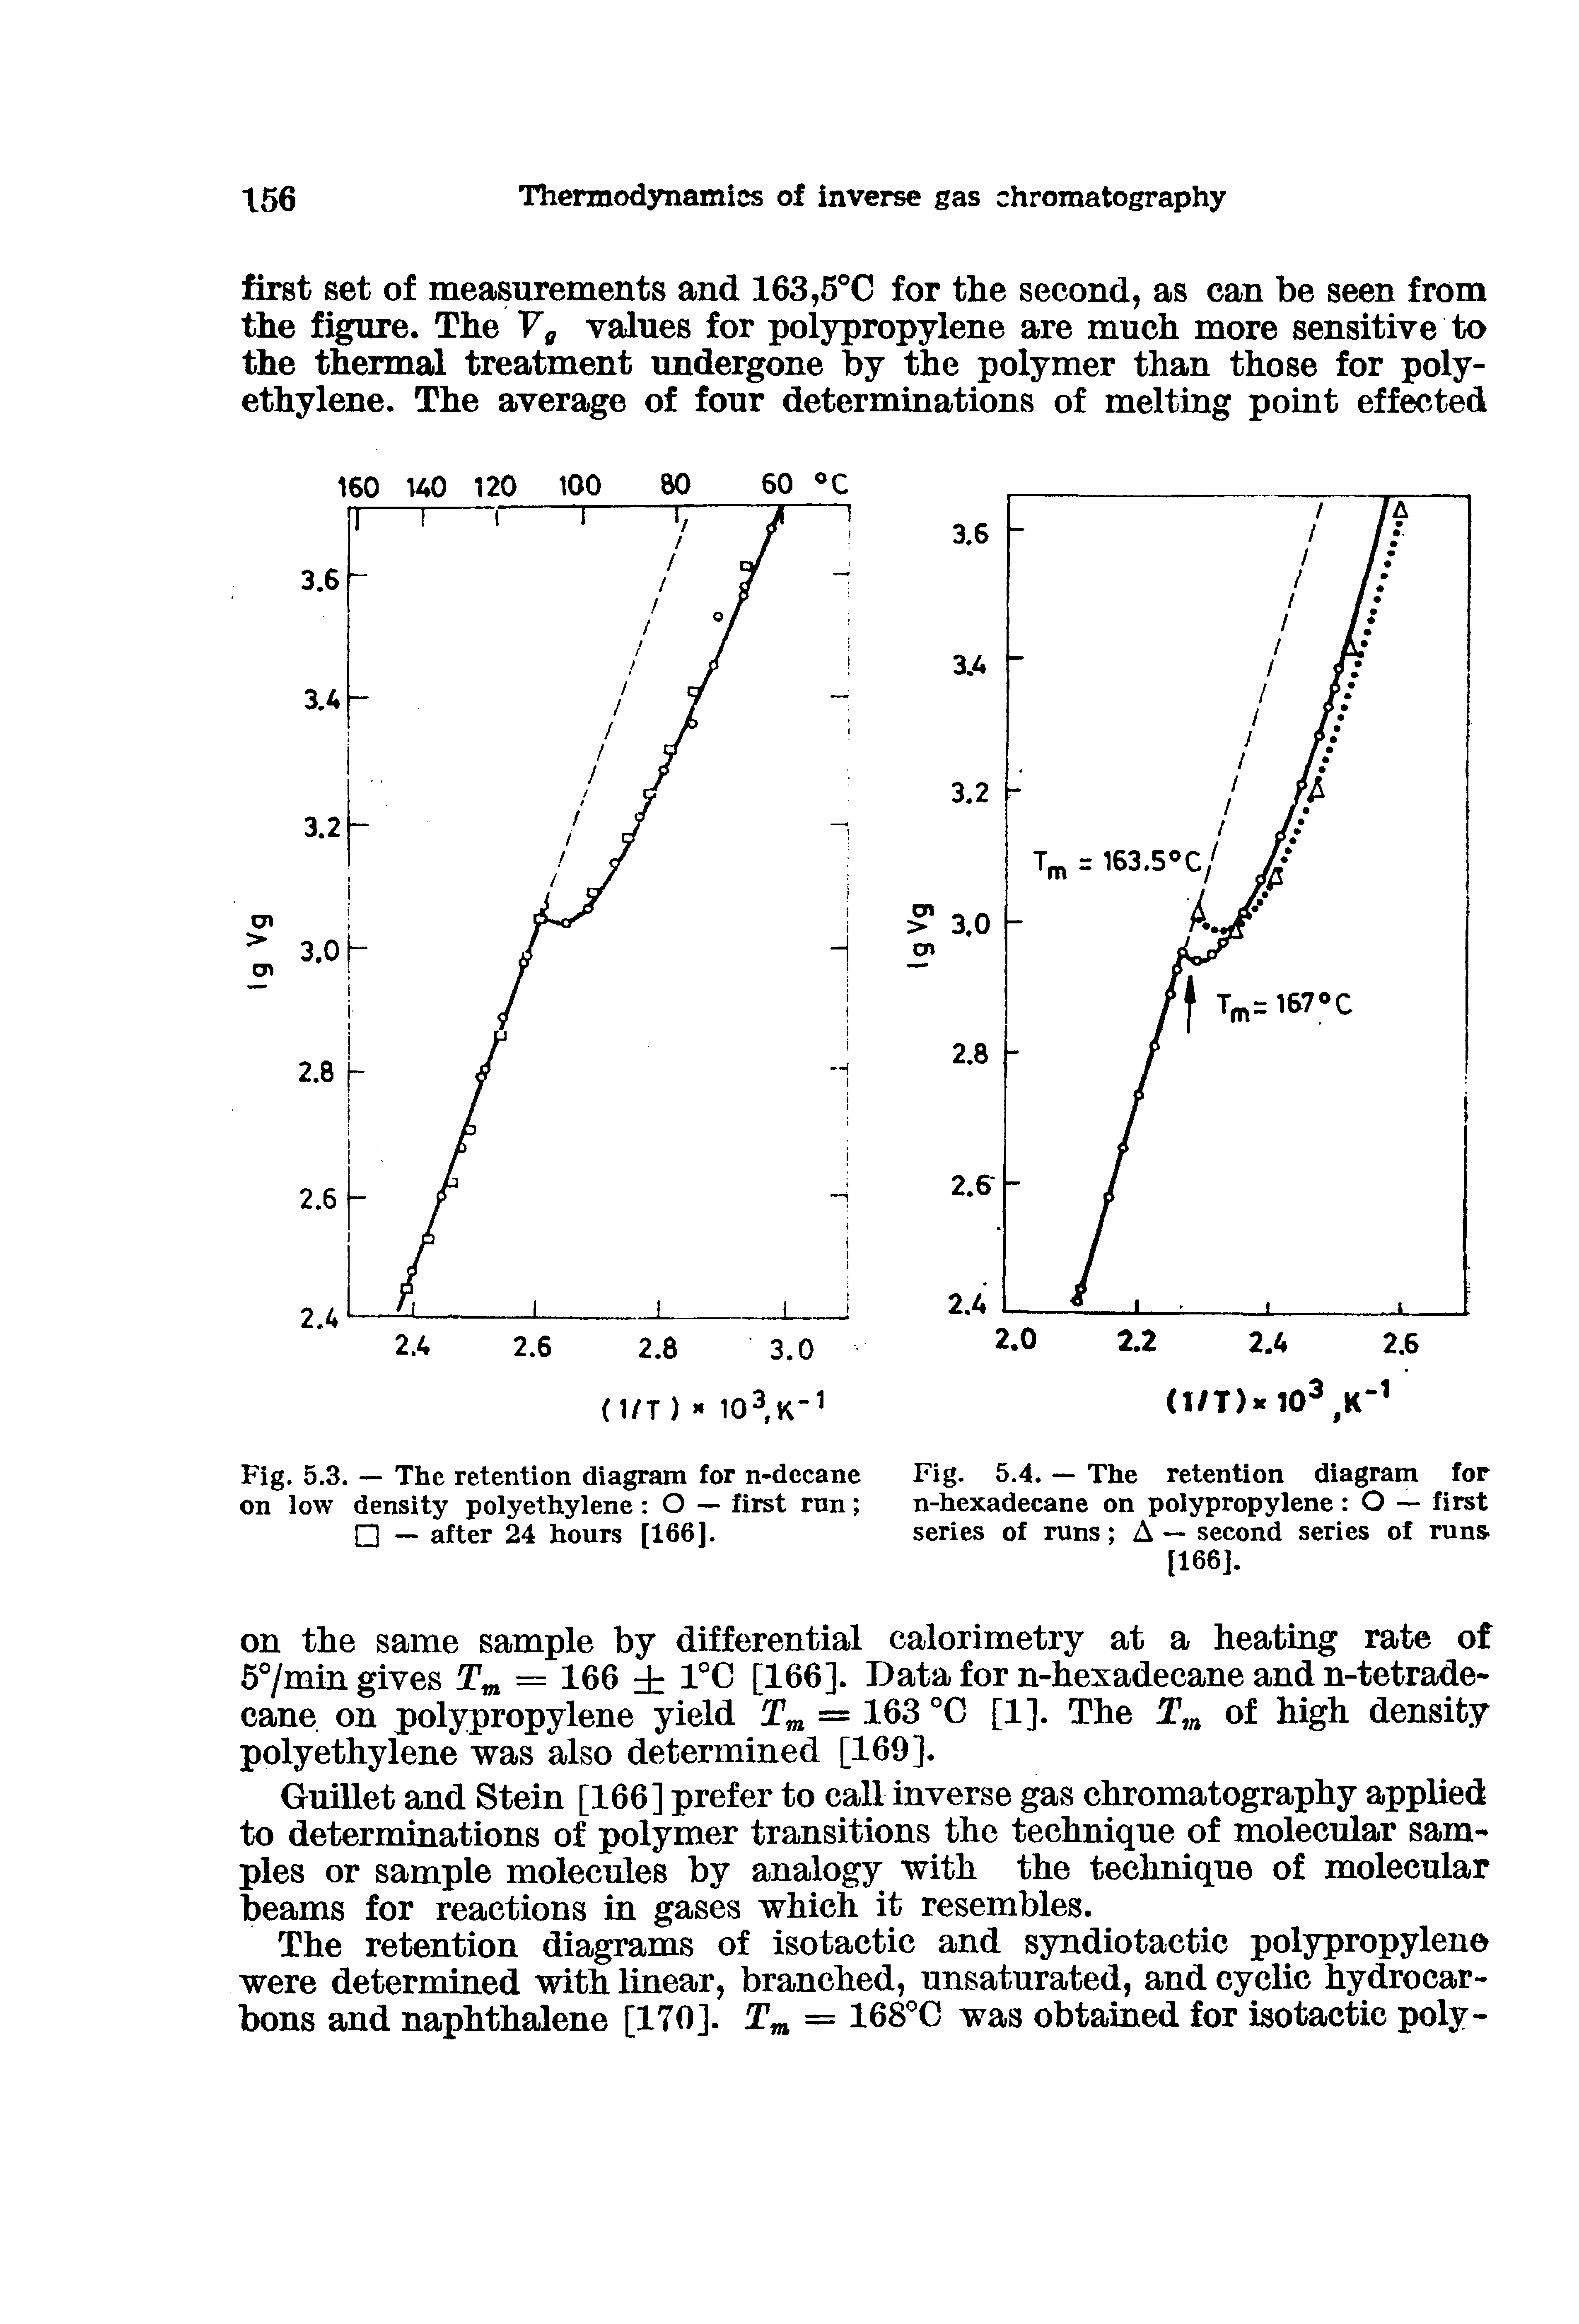 Fig. 5.3. — The retention diagram for n-decane on low density polyethylene O — first run — after 24 hours [166].